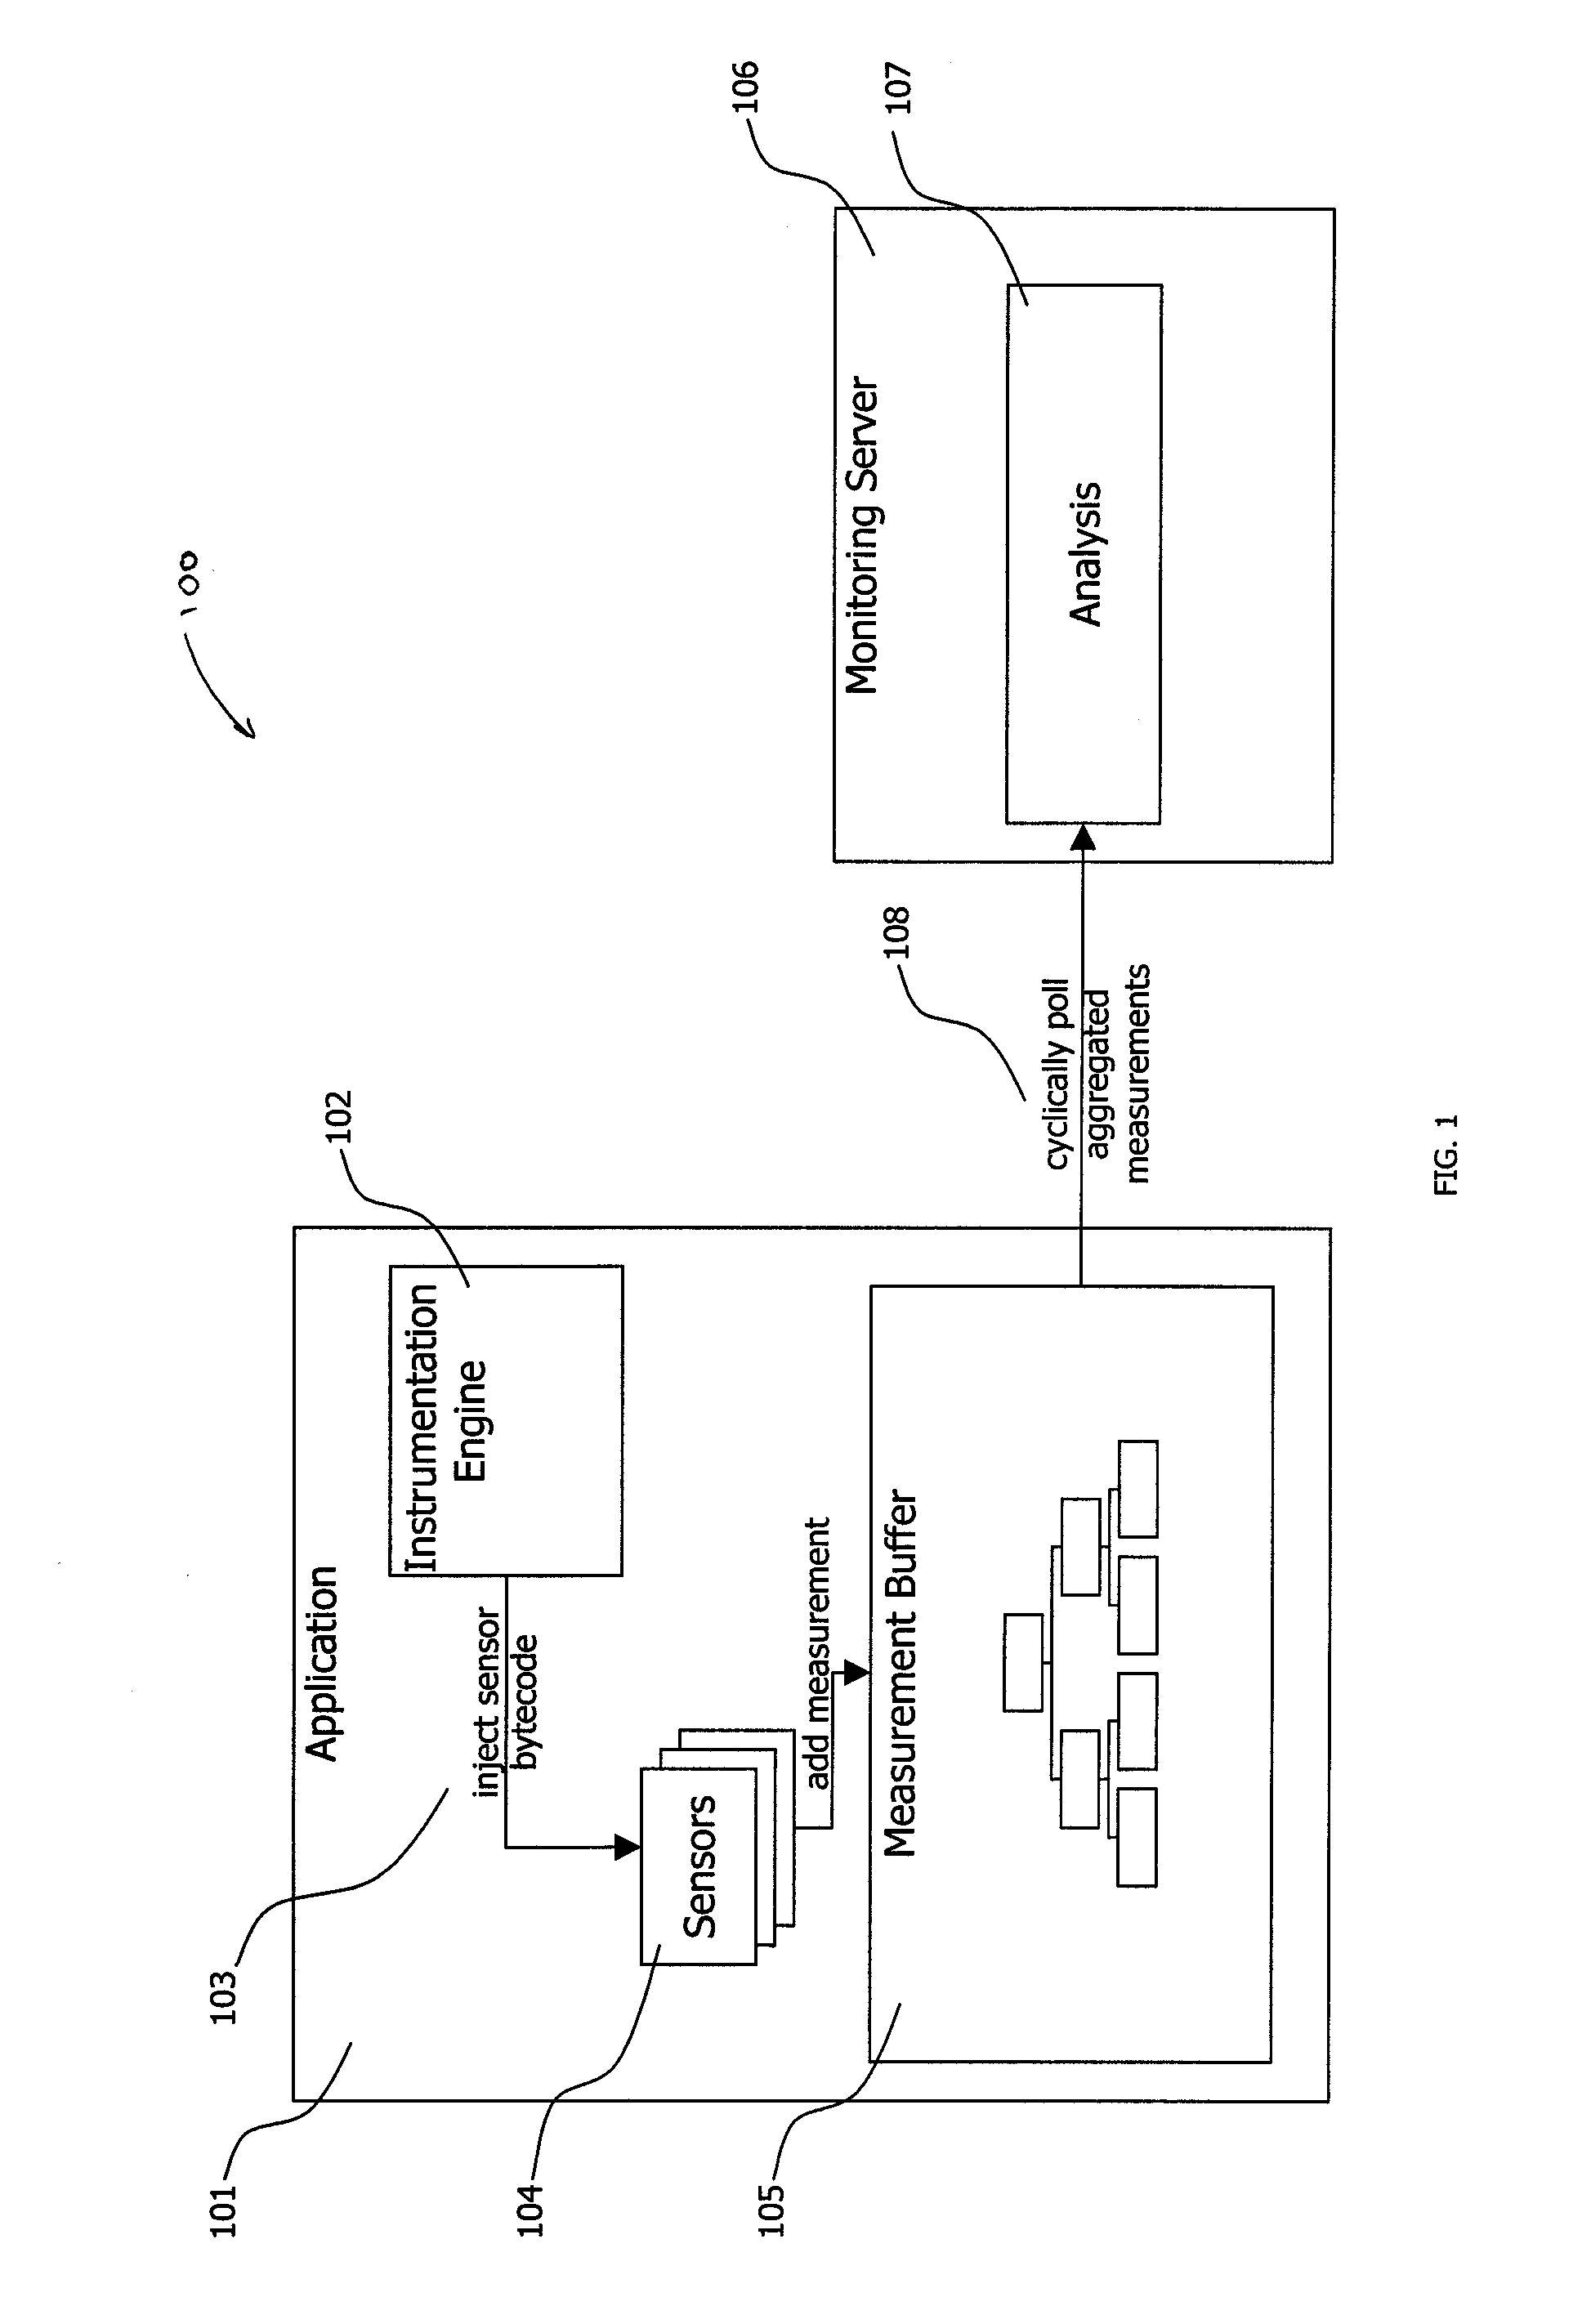 Methods and system for global real-time transaction tracing